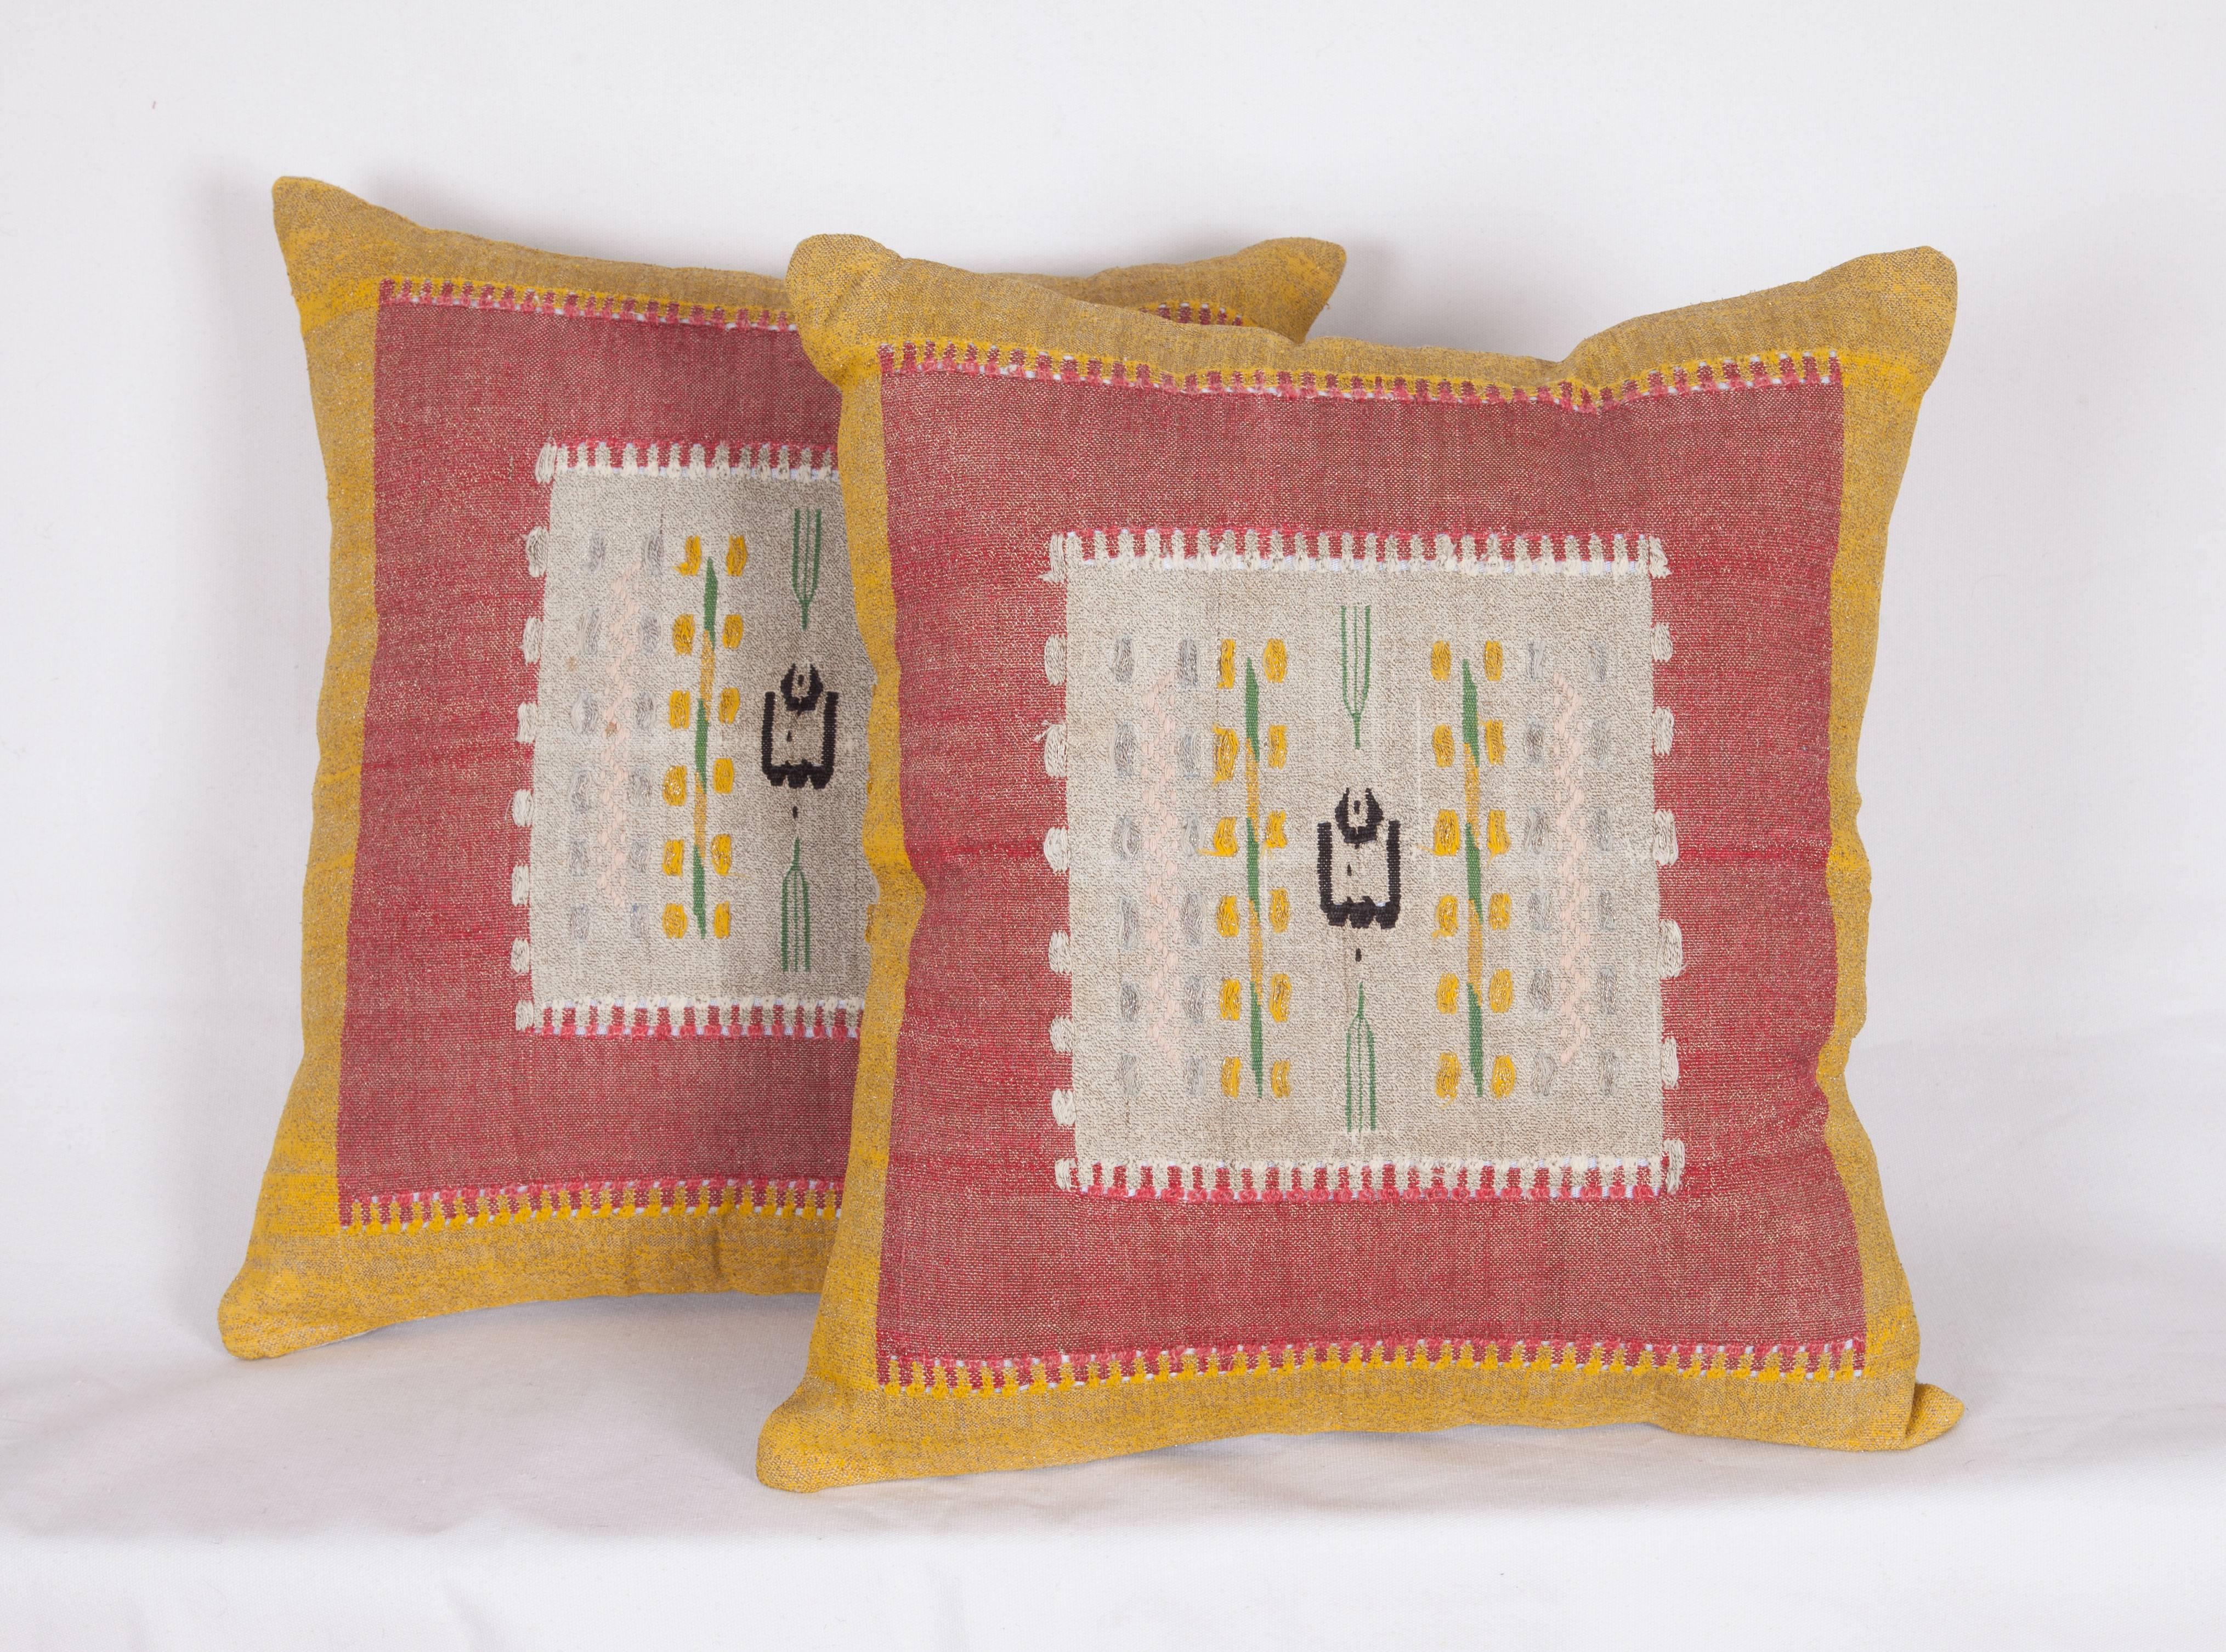 Syrian Antique Pillows Made Out of a Middle Eastern Pillow Tops